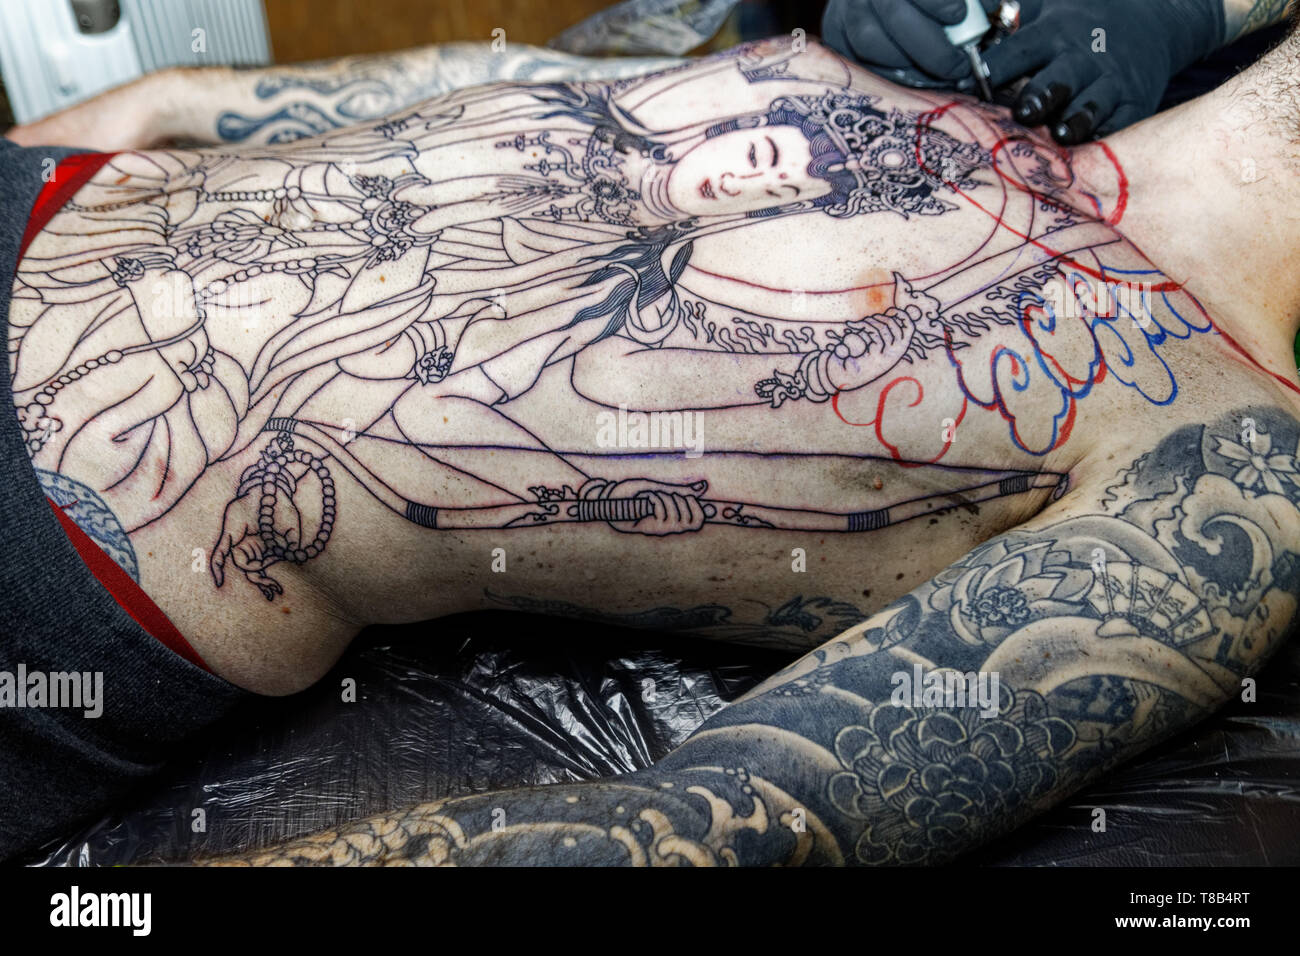 Paris,France.Feb 15,2019.The Tattoo Salon in Great Hall of the Villette on February 15, 2019 in Paris. Credit:Veronique Phitoussi/Alamy Stock Photo Stock Photo